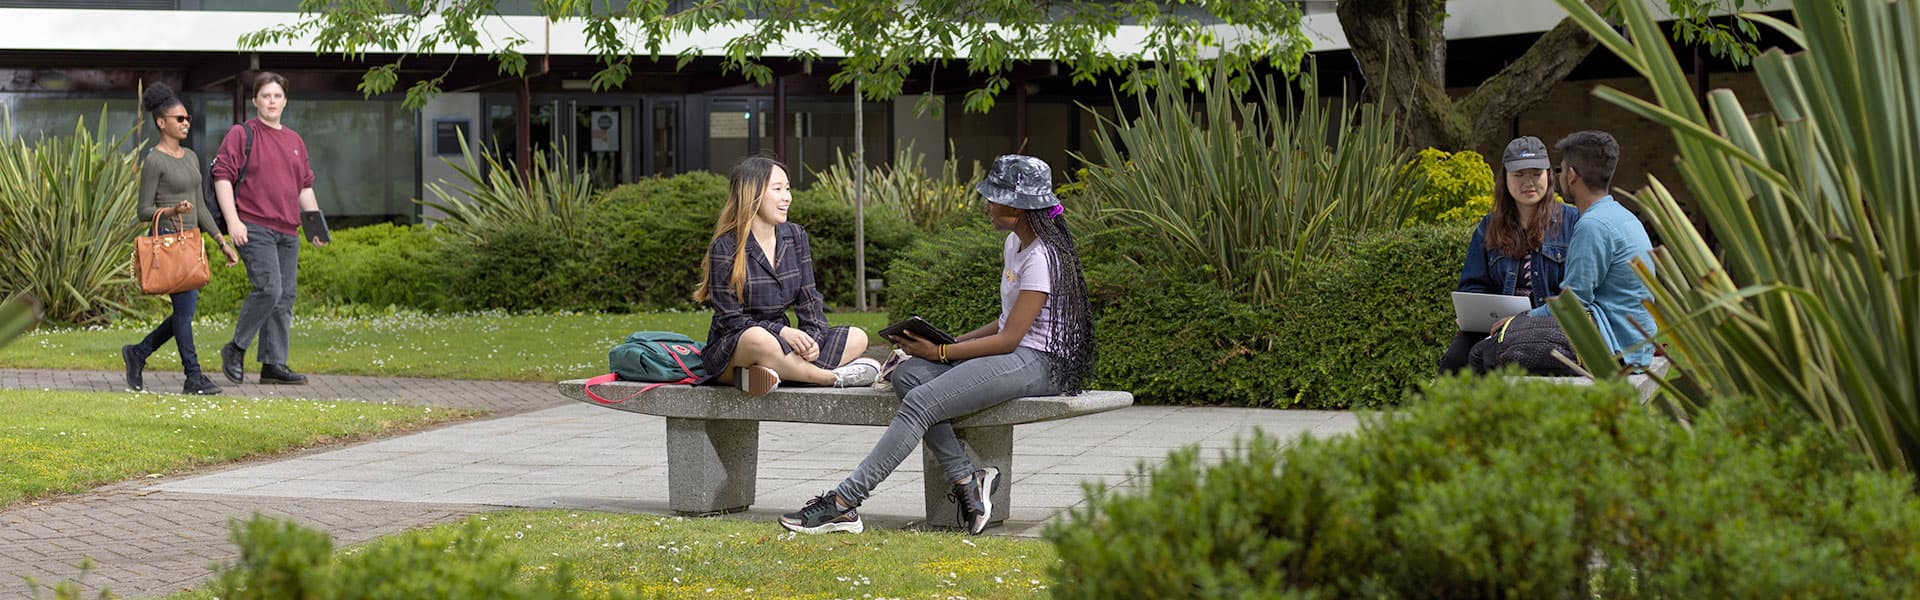 Students sitting on a stone bench chatting in an outdoor quad, surrounded by greenery